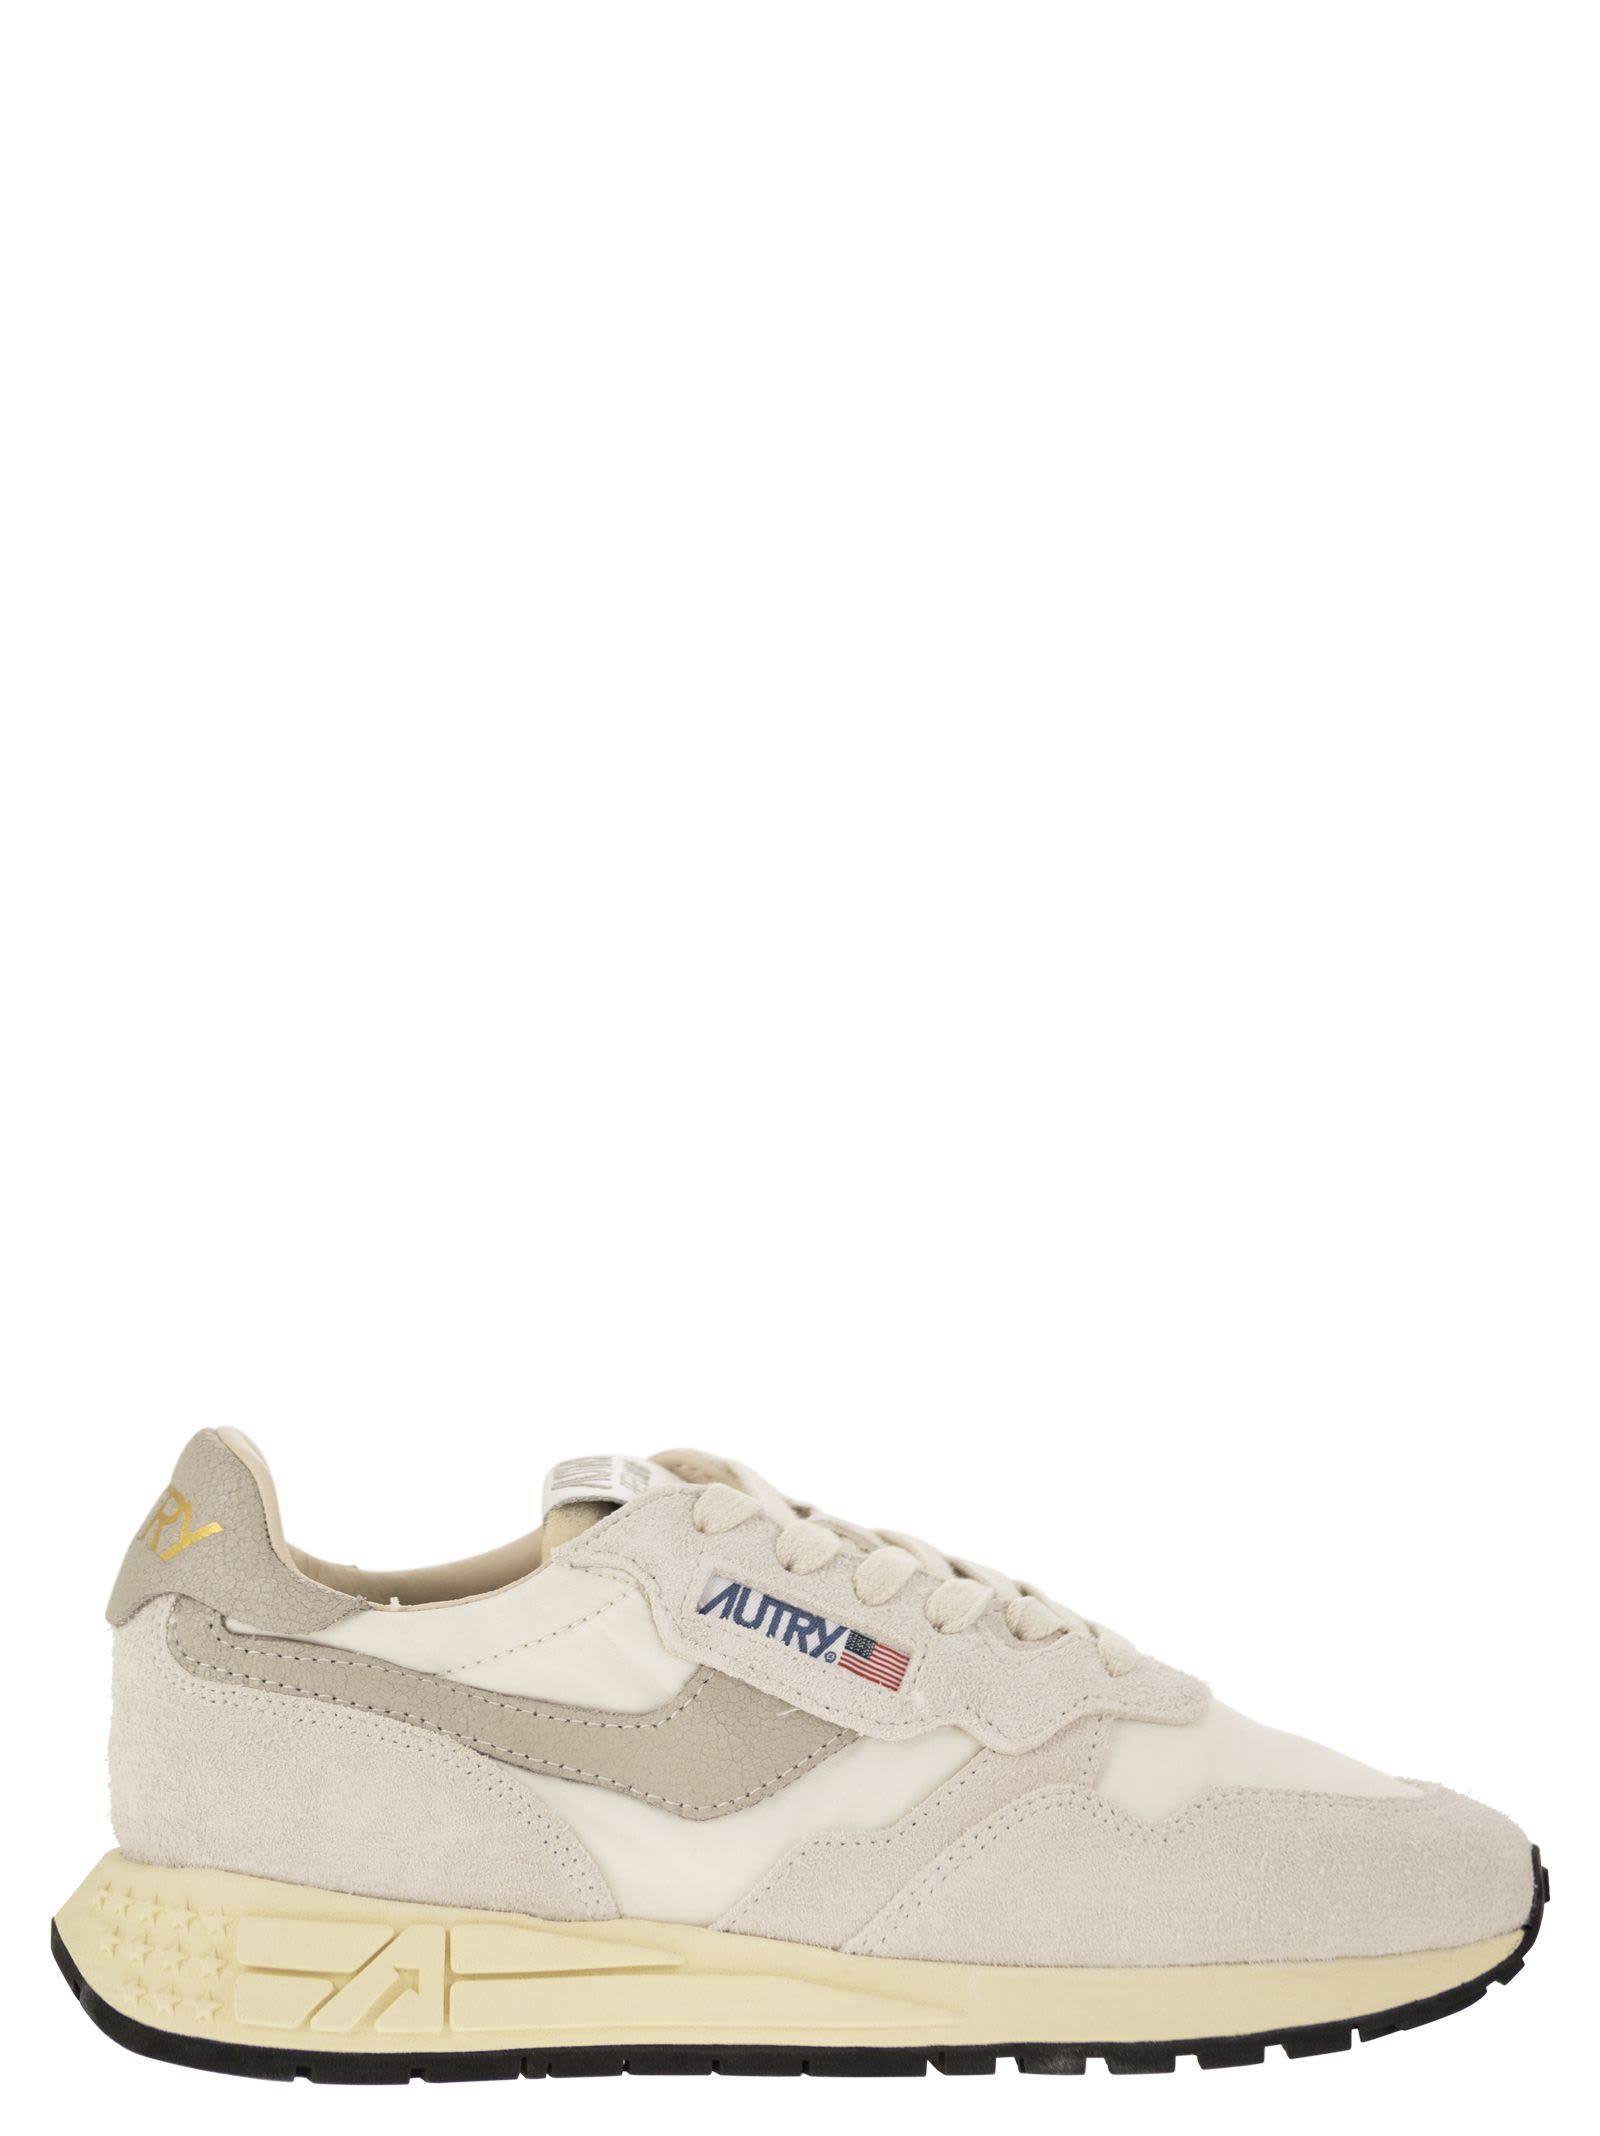 Autry Reelwind - Suede And Technical Textile Trainer In Wht/nat